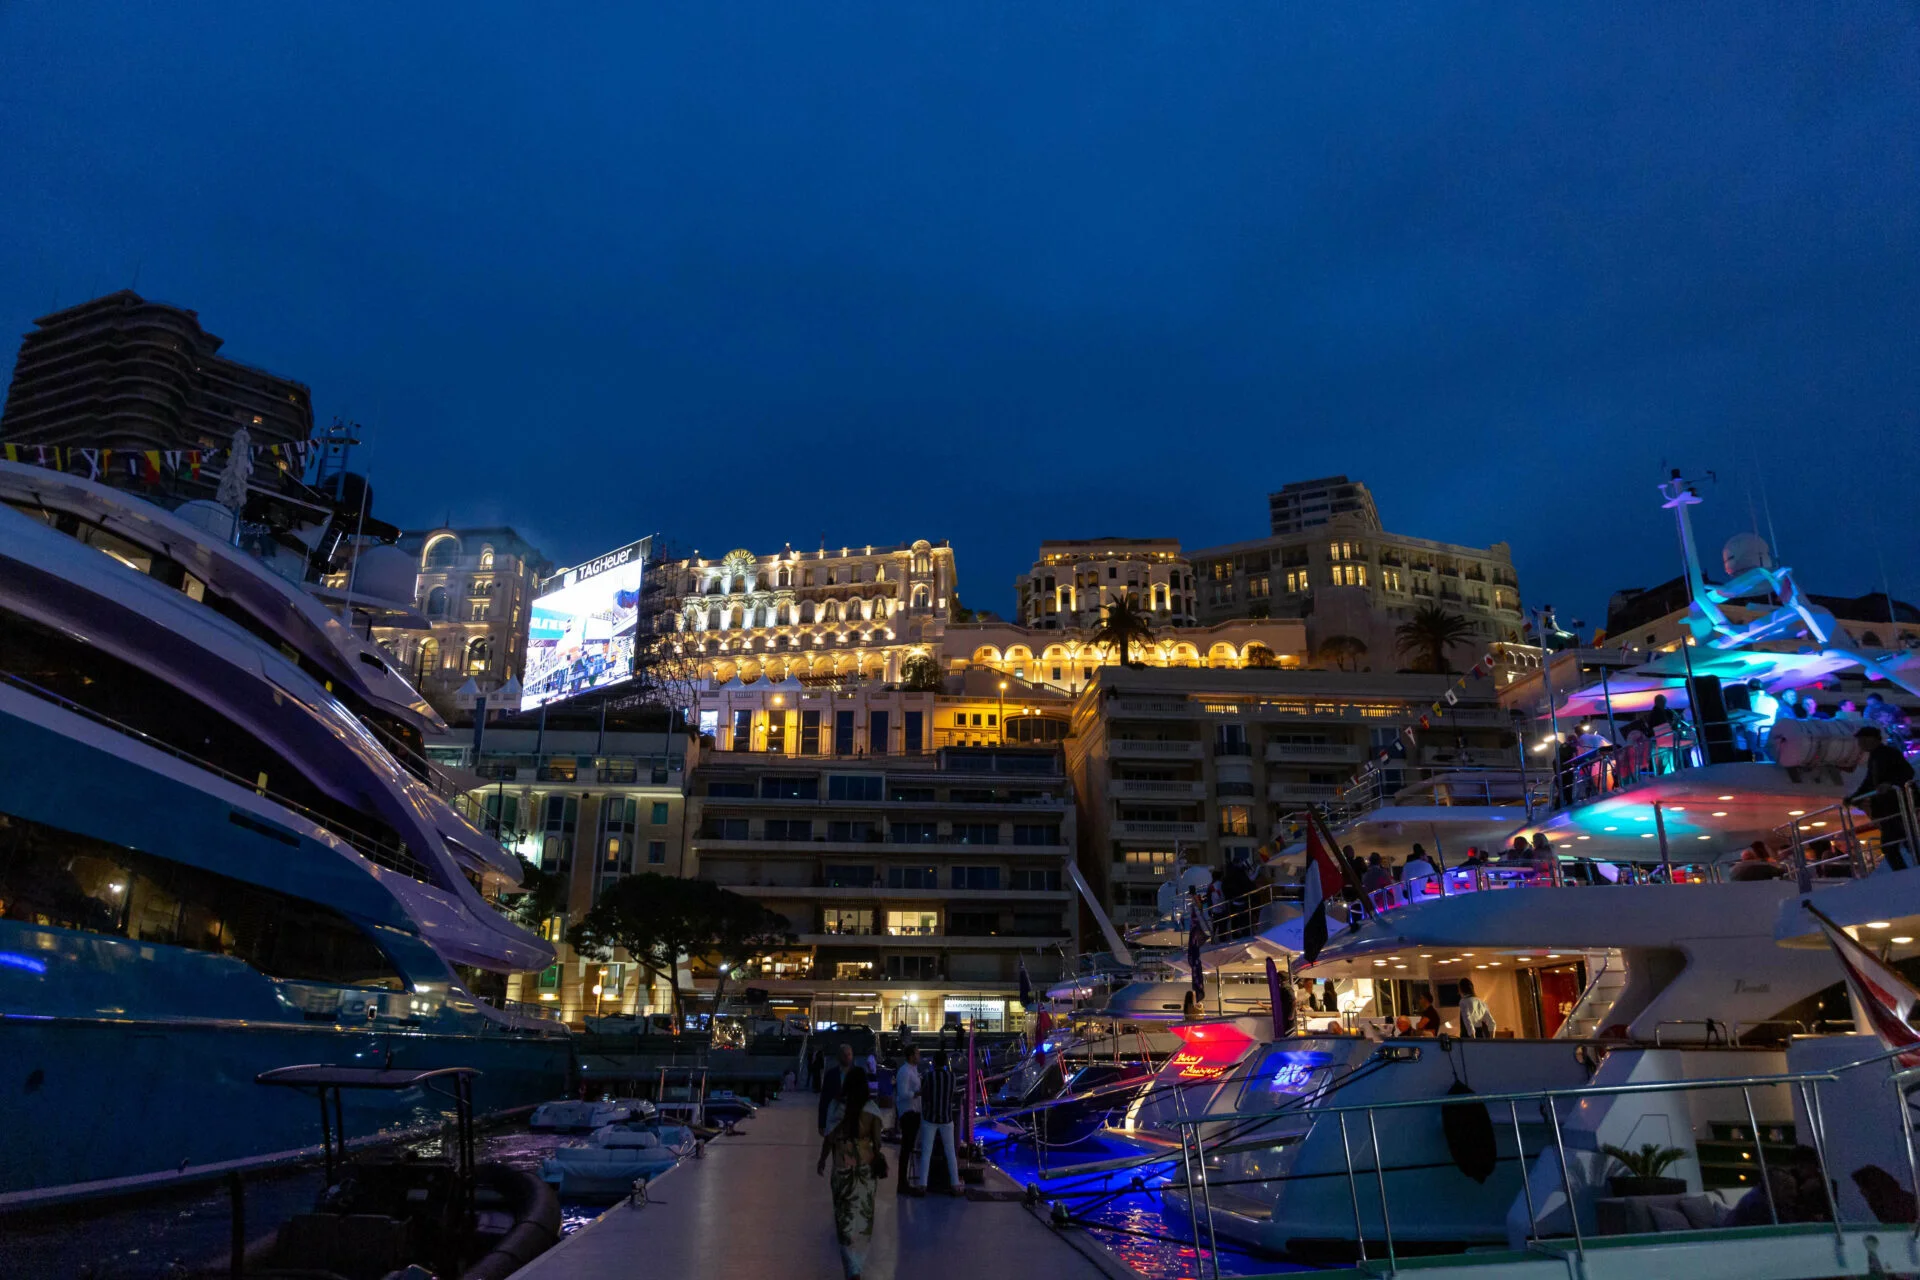 The beauty of the Monaco Harbour at night during the Monaco Grand Prix race weekend...